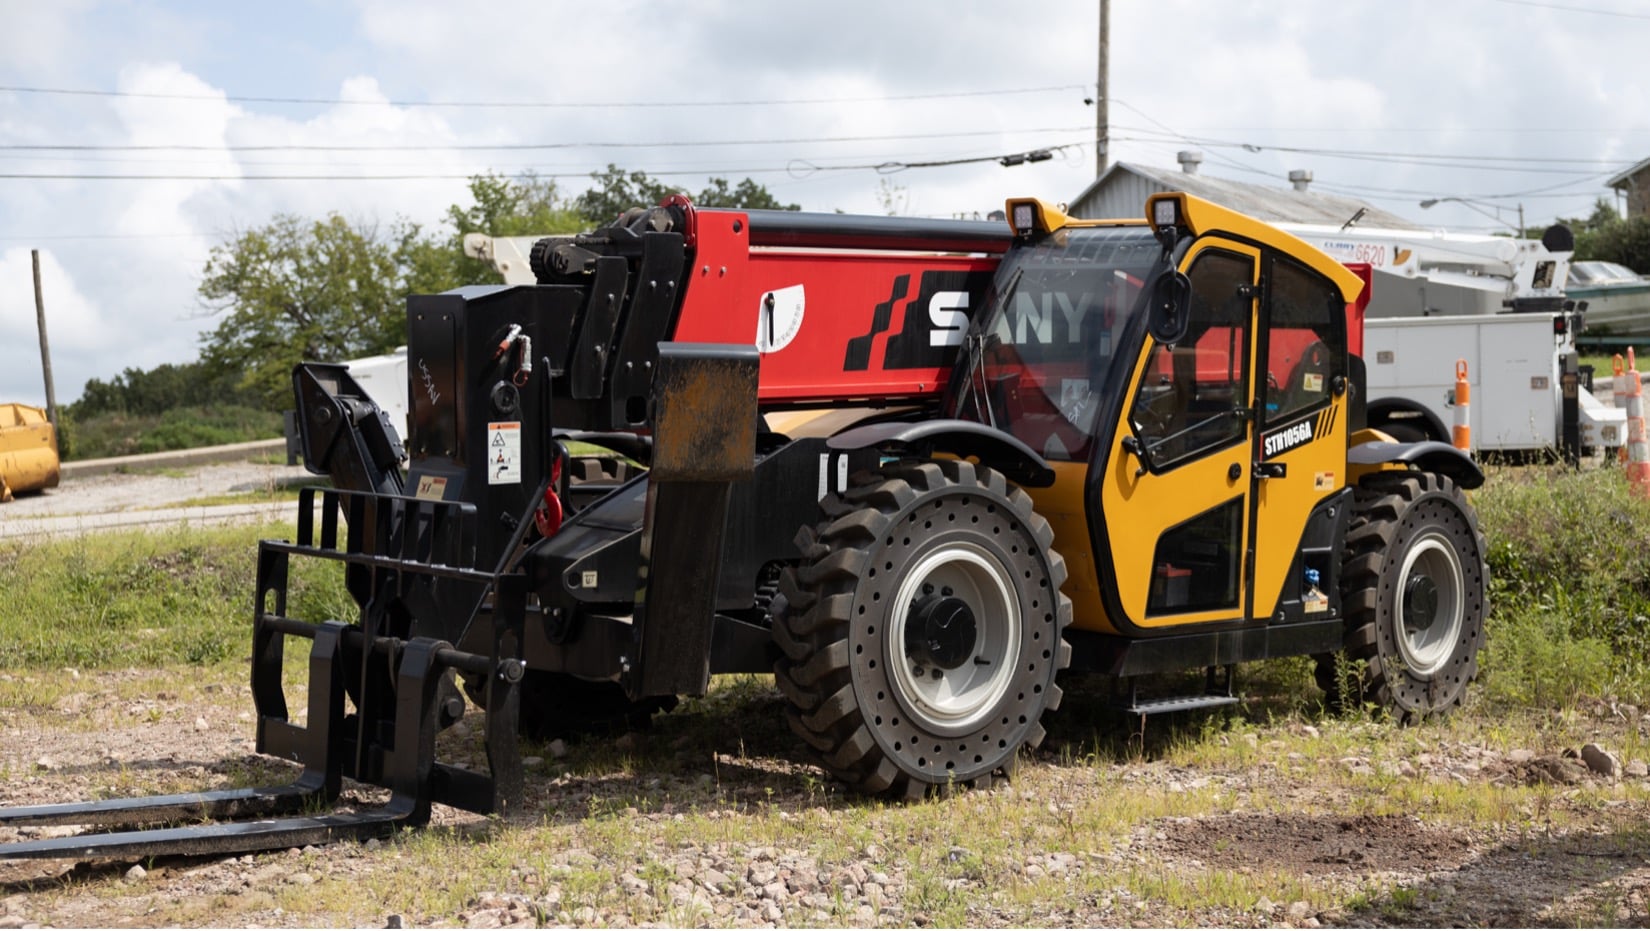 A Leading Construction Equipment Dealer in Kansas City Describes Common Uses for Telehandlers